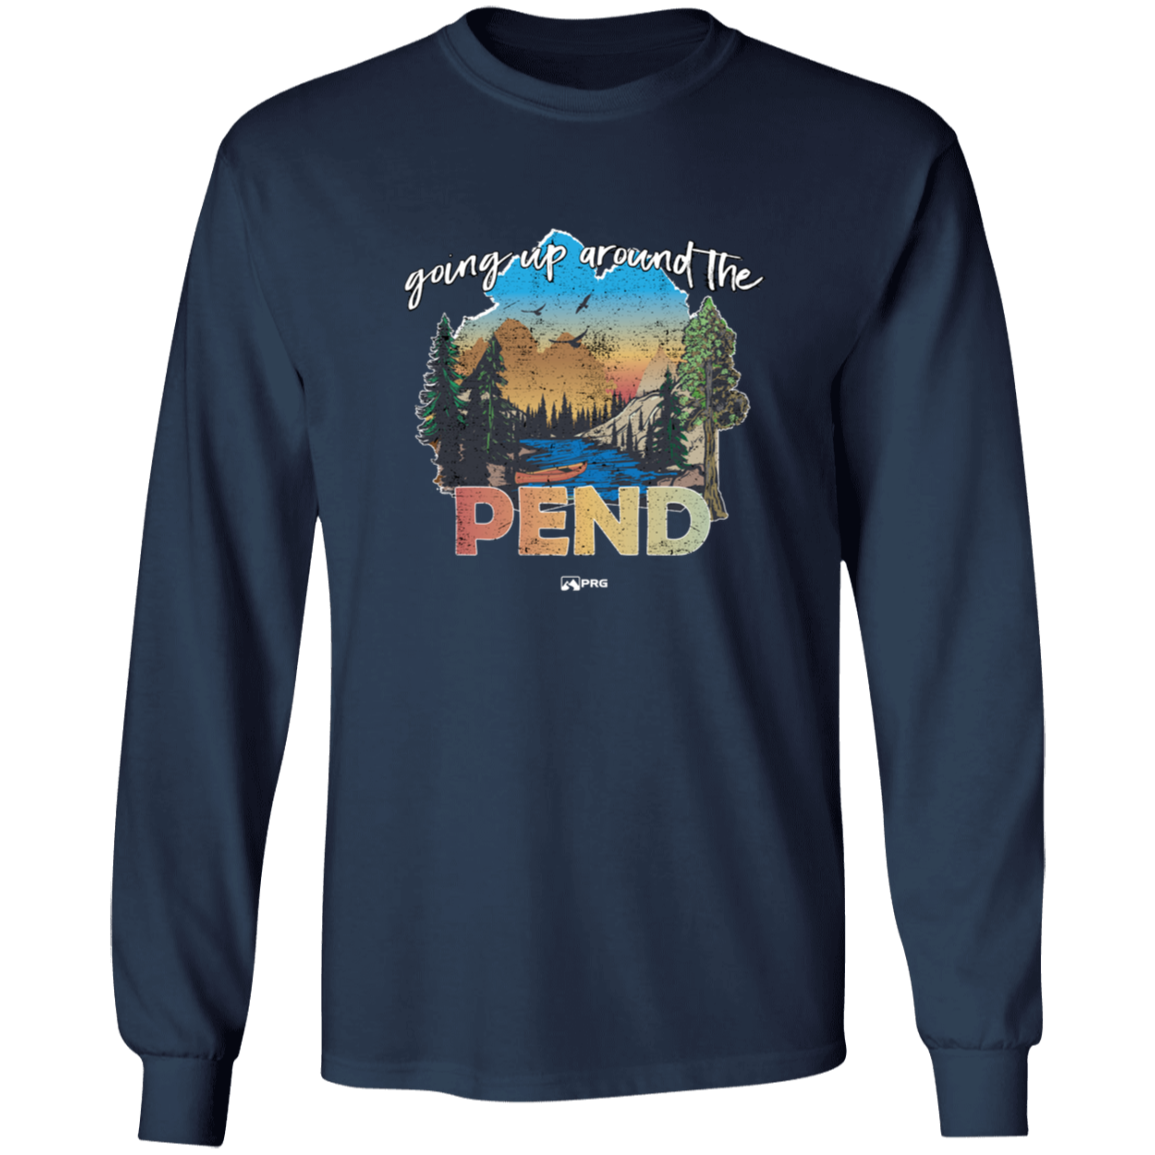 Around the Pend - Long Sleeve